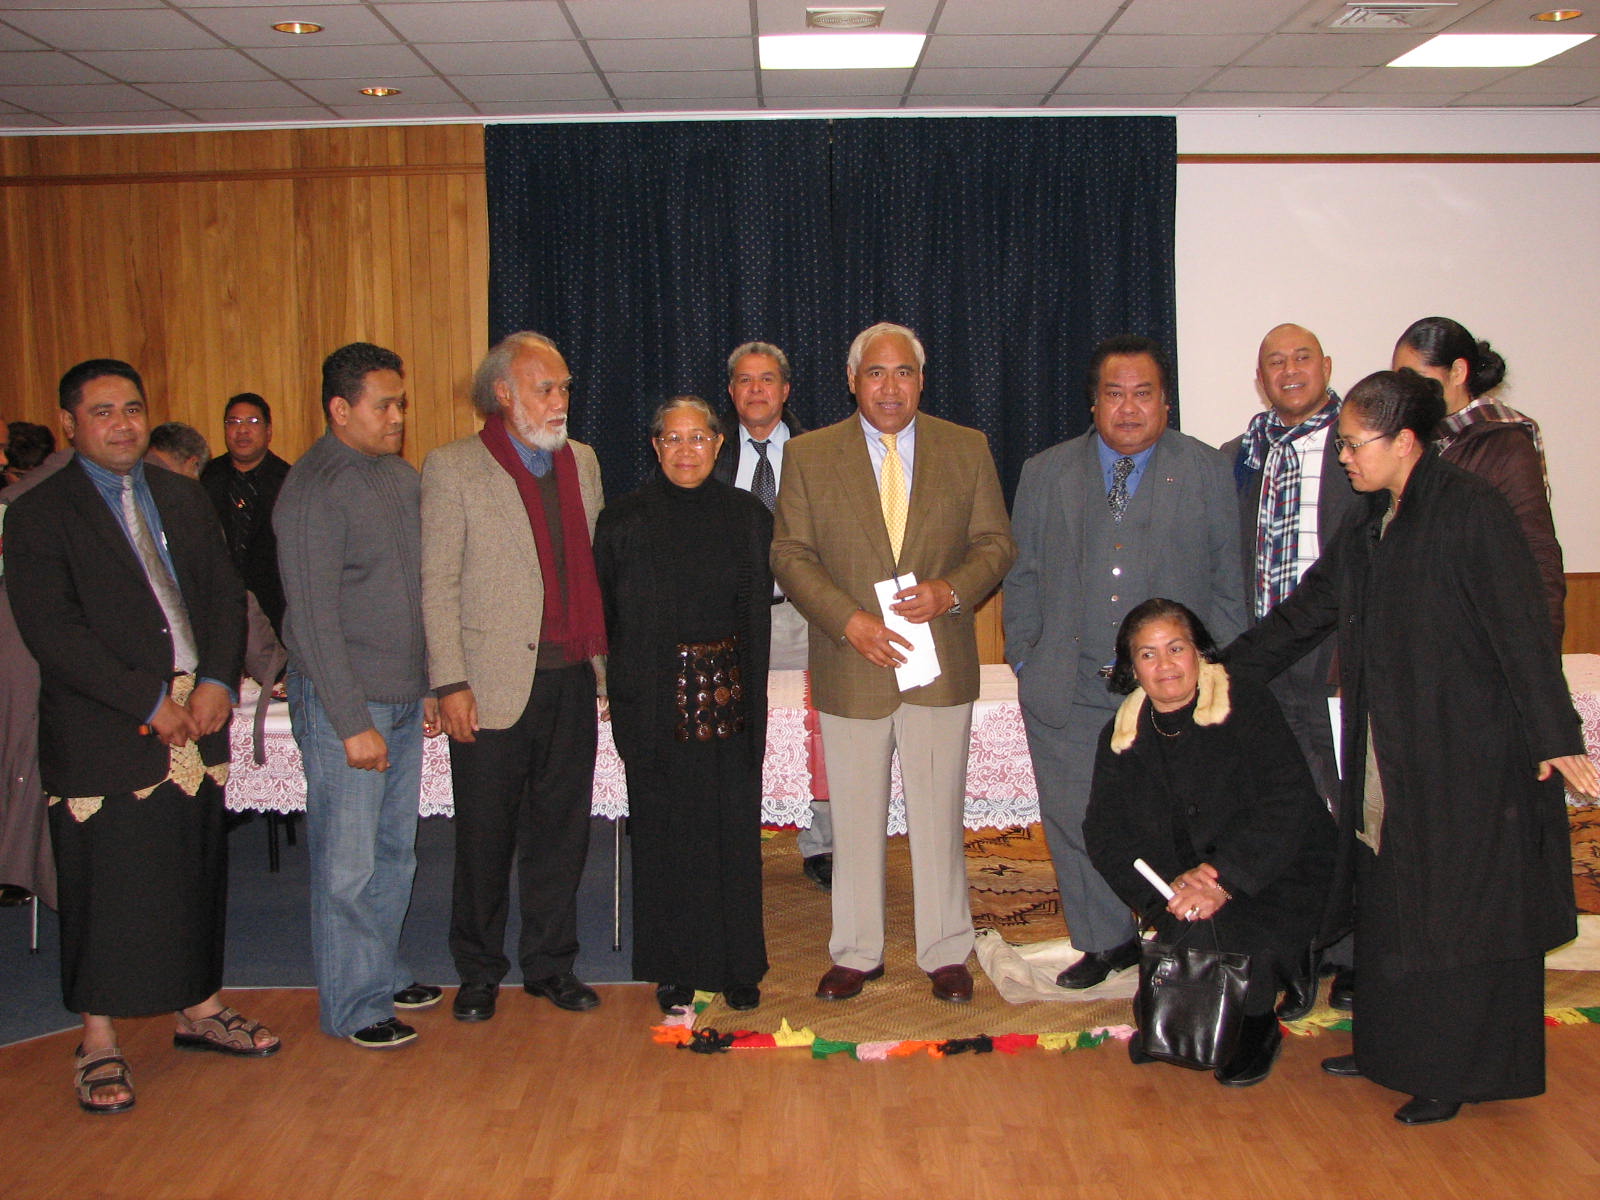 In picture, the Prince in the middle holding the white document, on his left is Dr ʻAna Taufeʻulungaki and Dr Sitiveni Halapua and members of the Tongan community in New Zealand after the meeting in Otahuhu with the Tonga community. Photo/Tauʻataina Newspaper